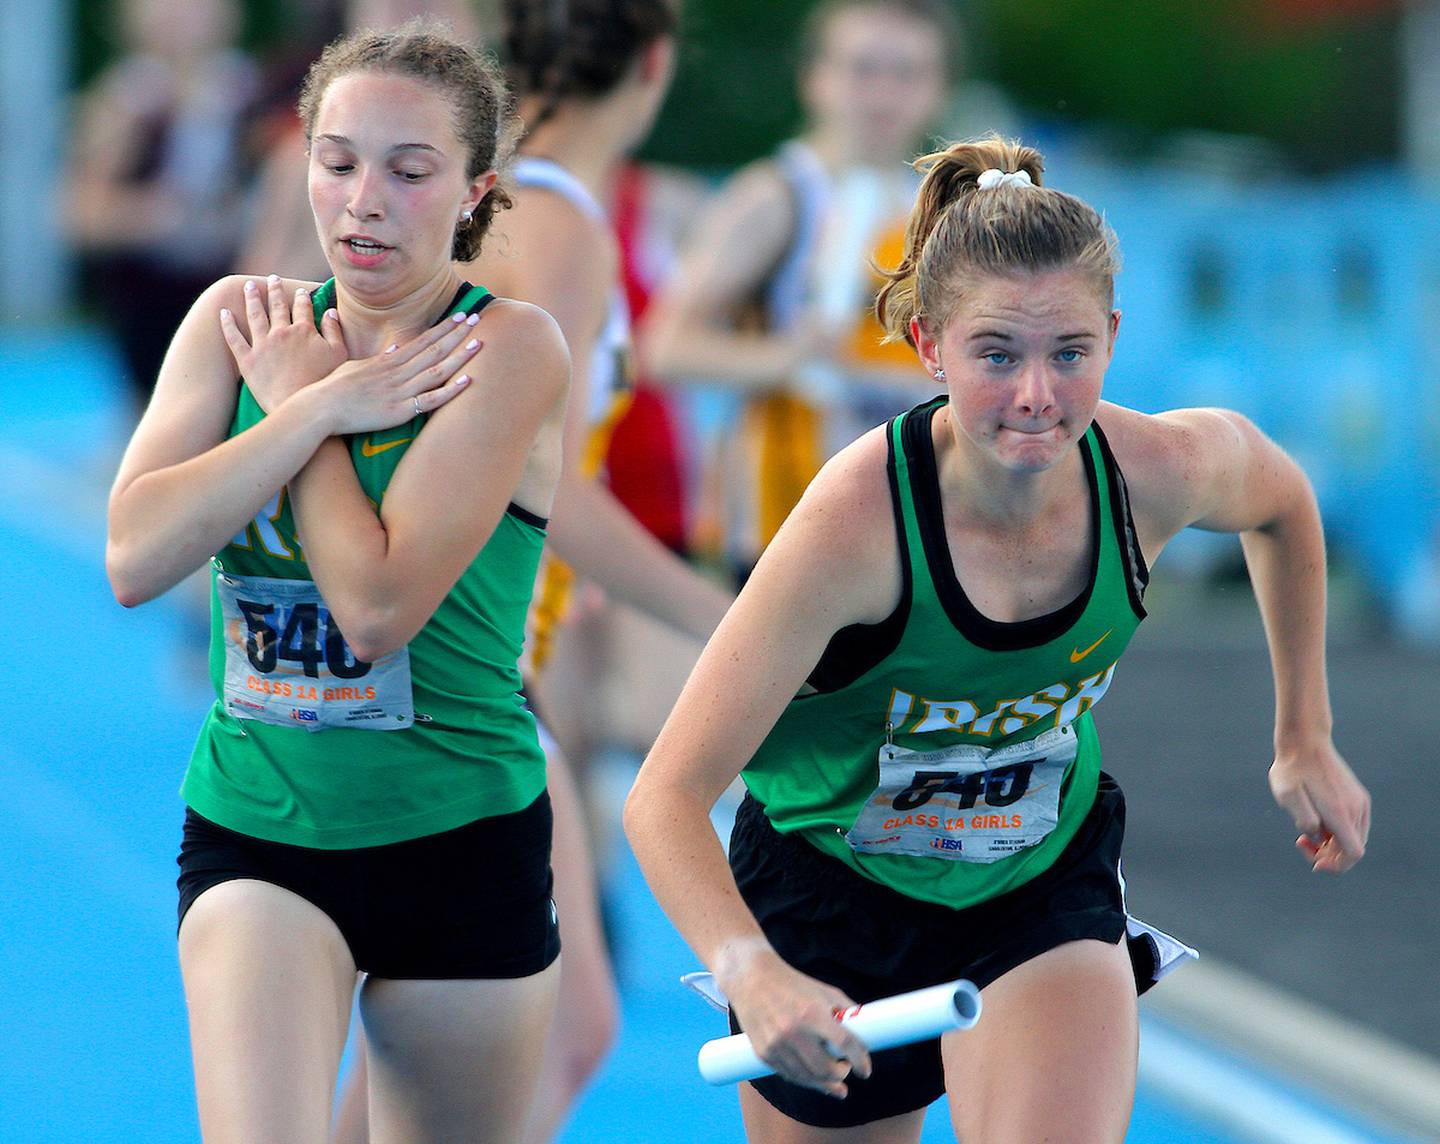 June 10, 2021 - Charleston, Illinois - After takin the baton from teammate Audrey Jenkins, Seneca's Amber Vroman starts out on her leg of the Class 1A 4x400-Meter Relay at the Illinois High School Association Track & Field State Finals.  (Photo: PhotoNews Media/Clark Brooks)